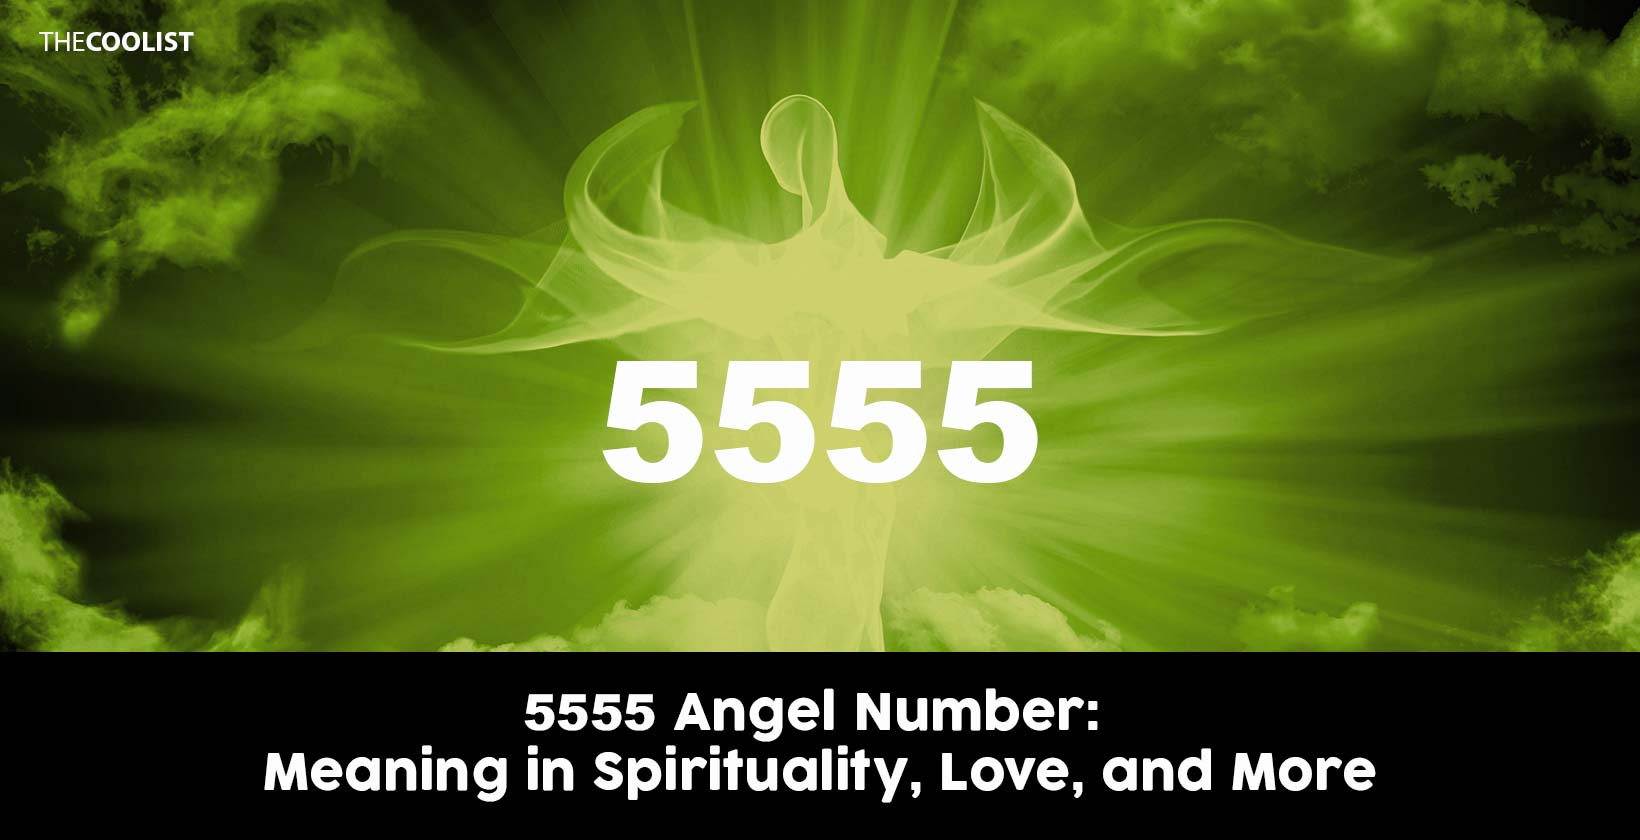 5555 Angel Number Meaning in Spirituality, Love, and More